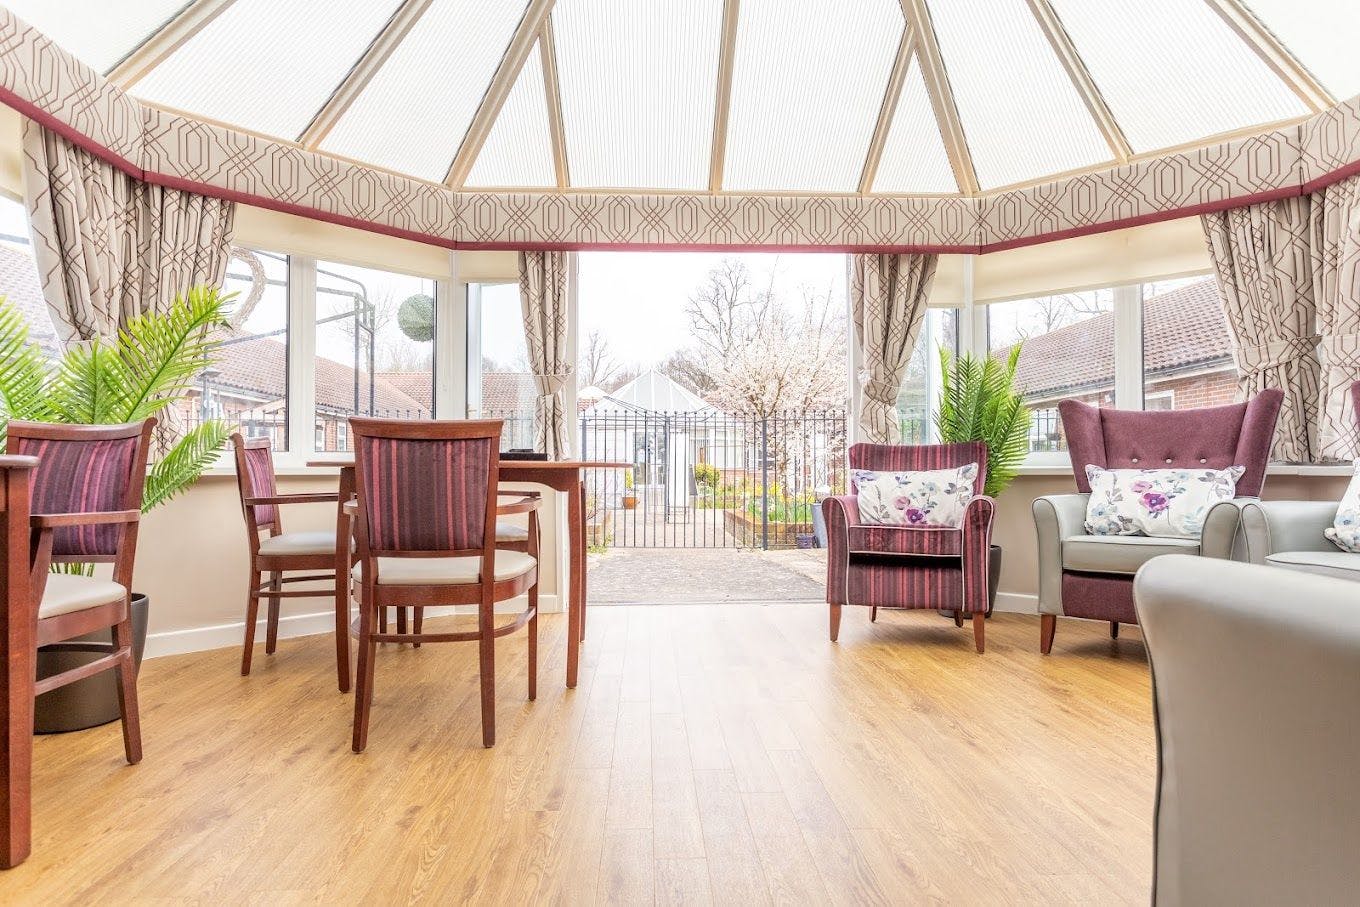 Communal Area at Monread Lodge Care Home in Hertfordshire, East of England